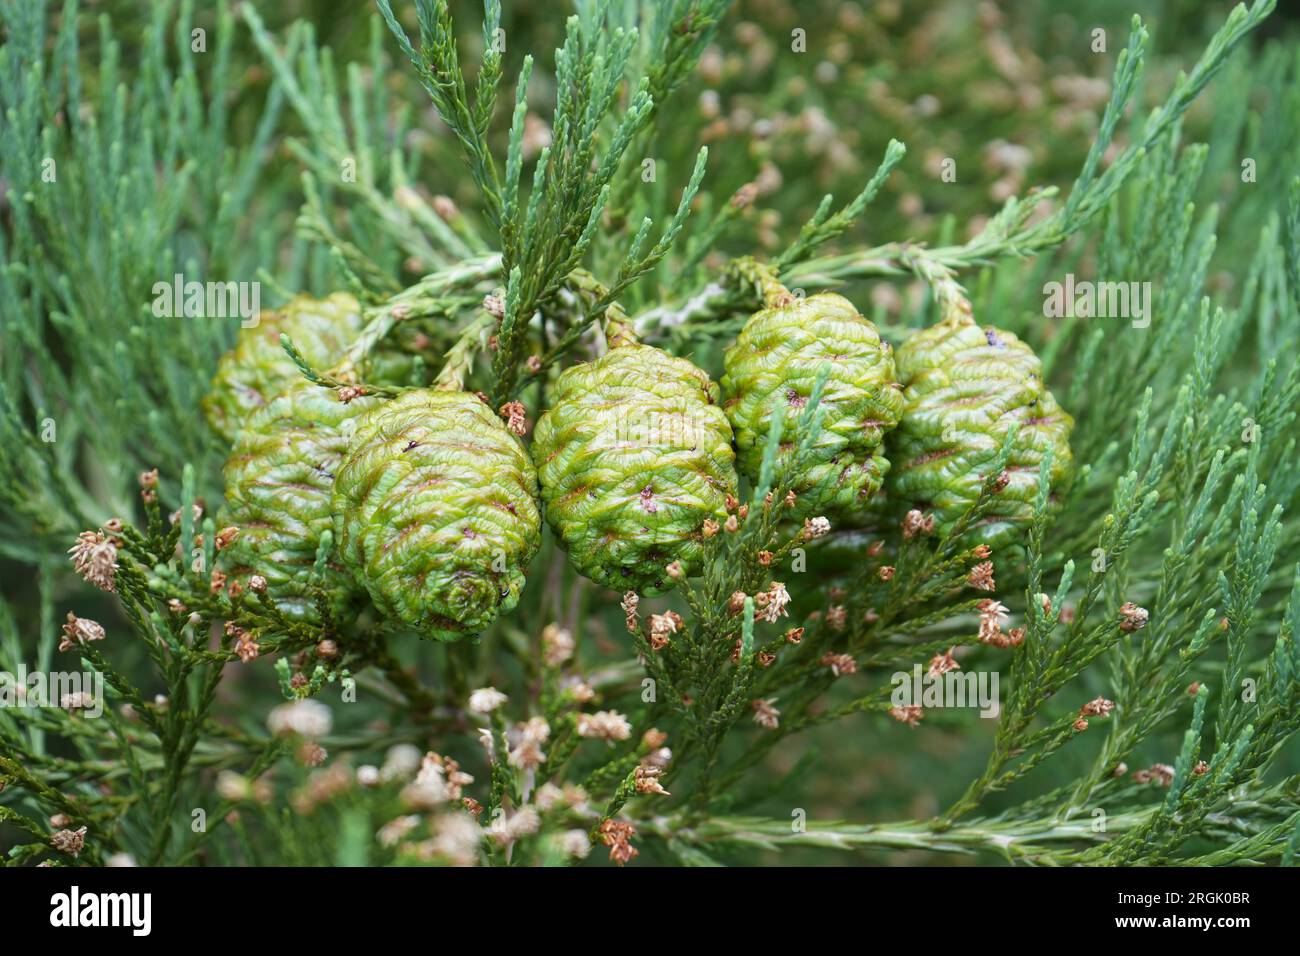 A Group of Giant Sequoia (Sequoiadendron giganteum) seed cones. Stock Photo